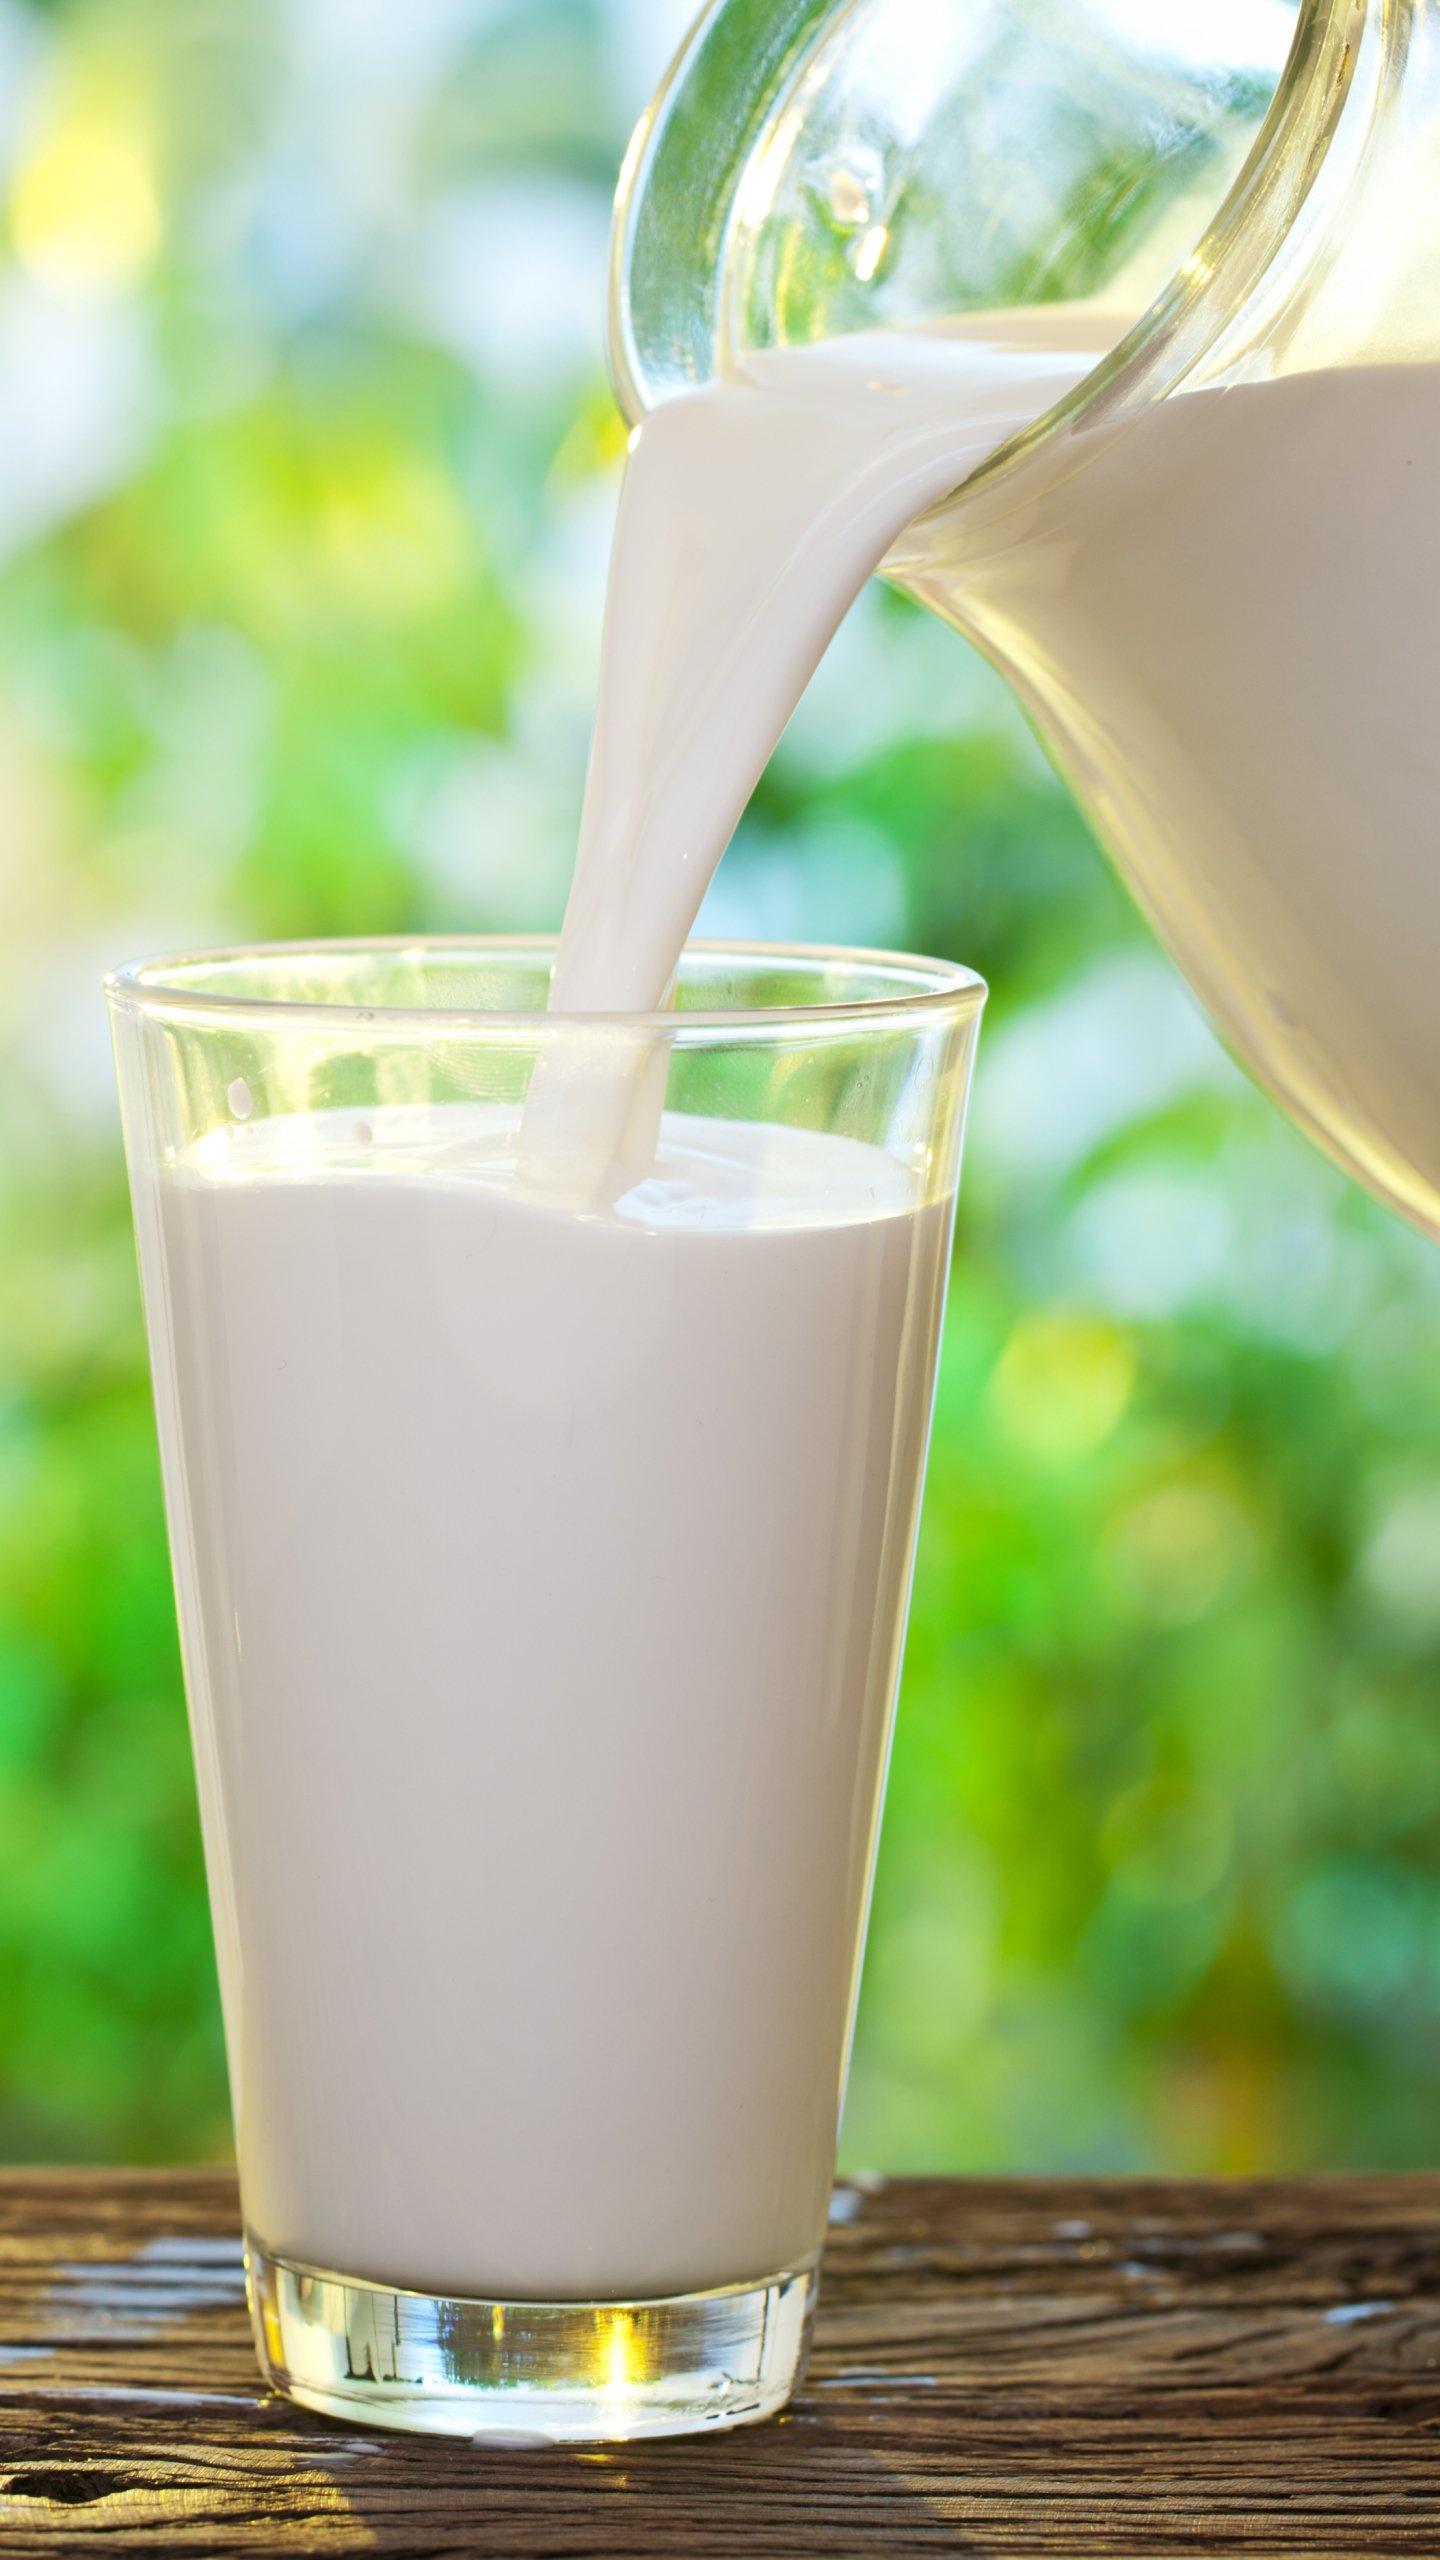 Milk: Filled with nine essential nutrients that benefit health, Food. 1440x2560 HD Wallpaper.